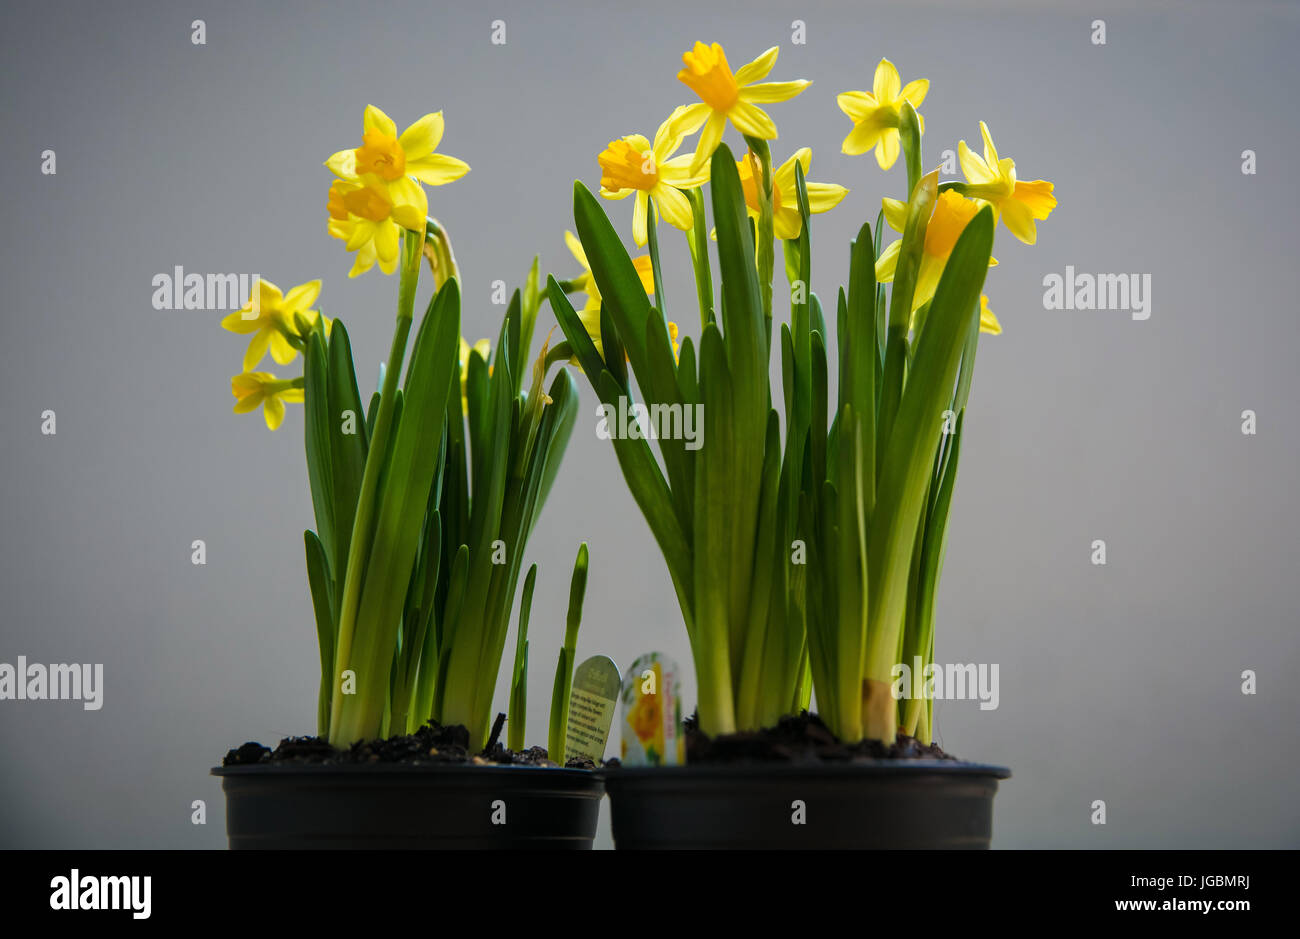 Two pots of daffodils on a simple background Stock Photo